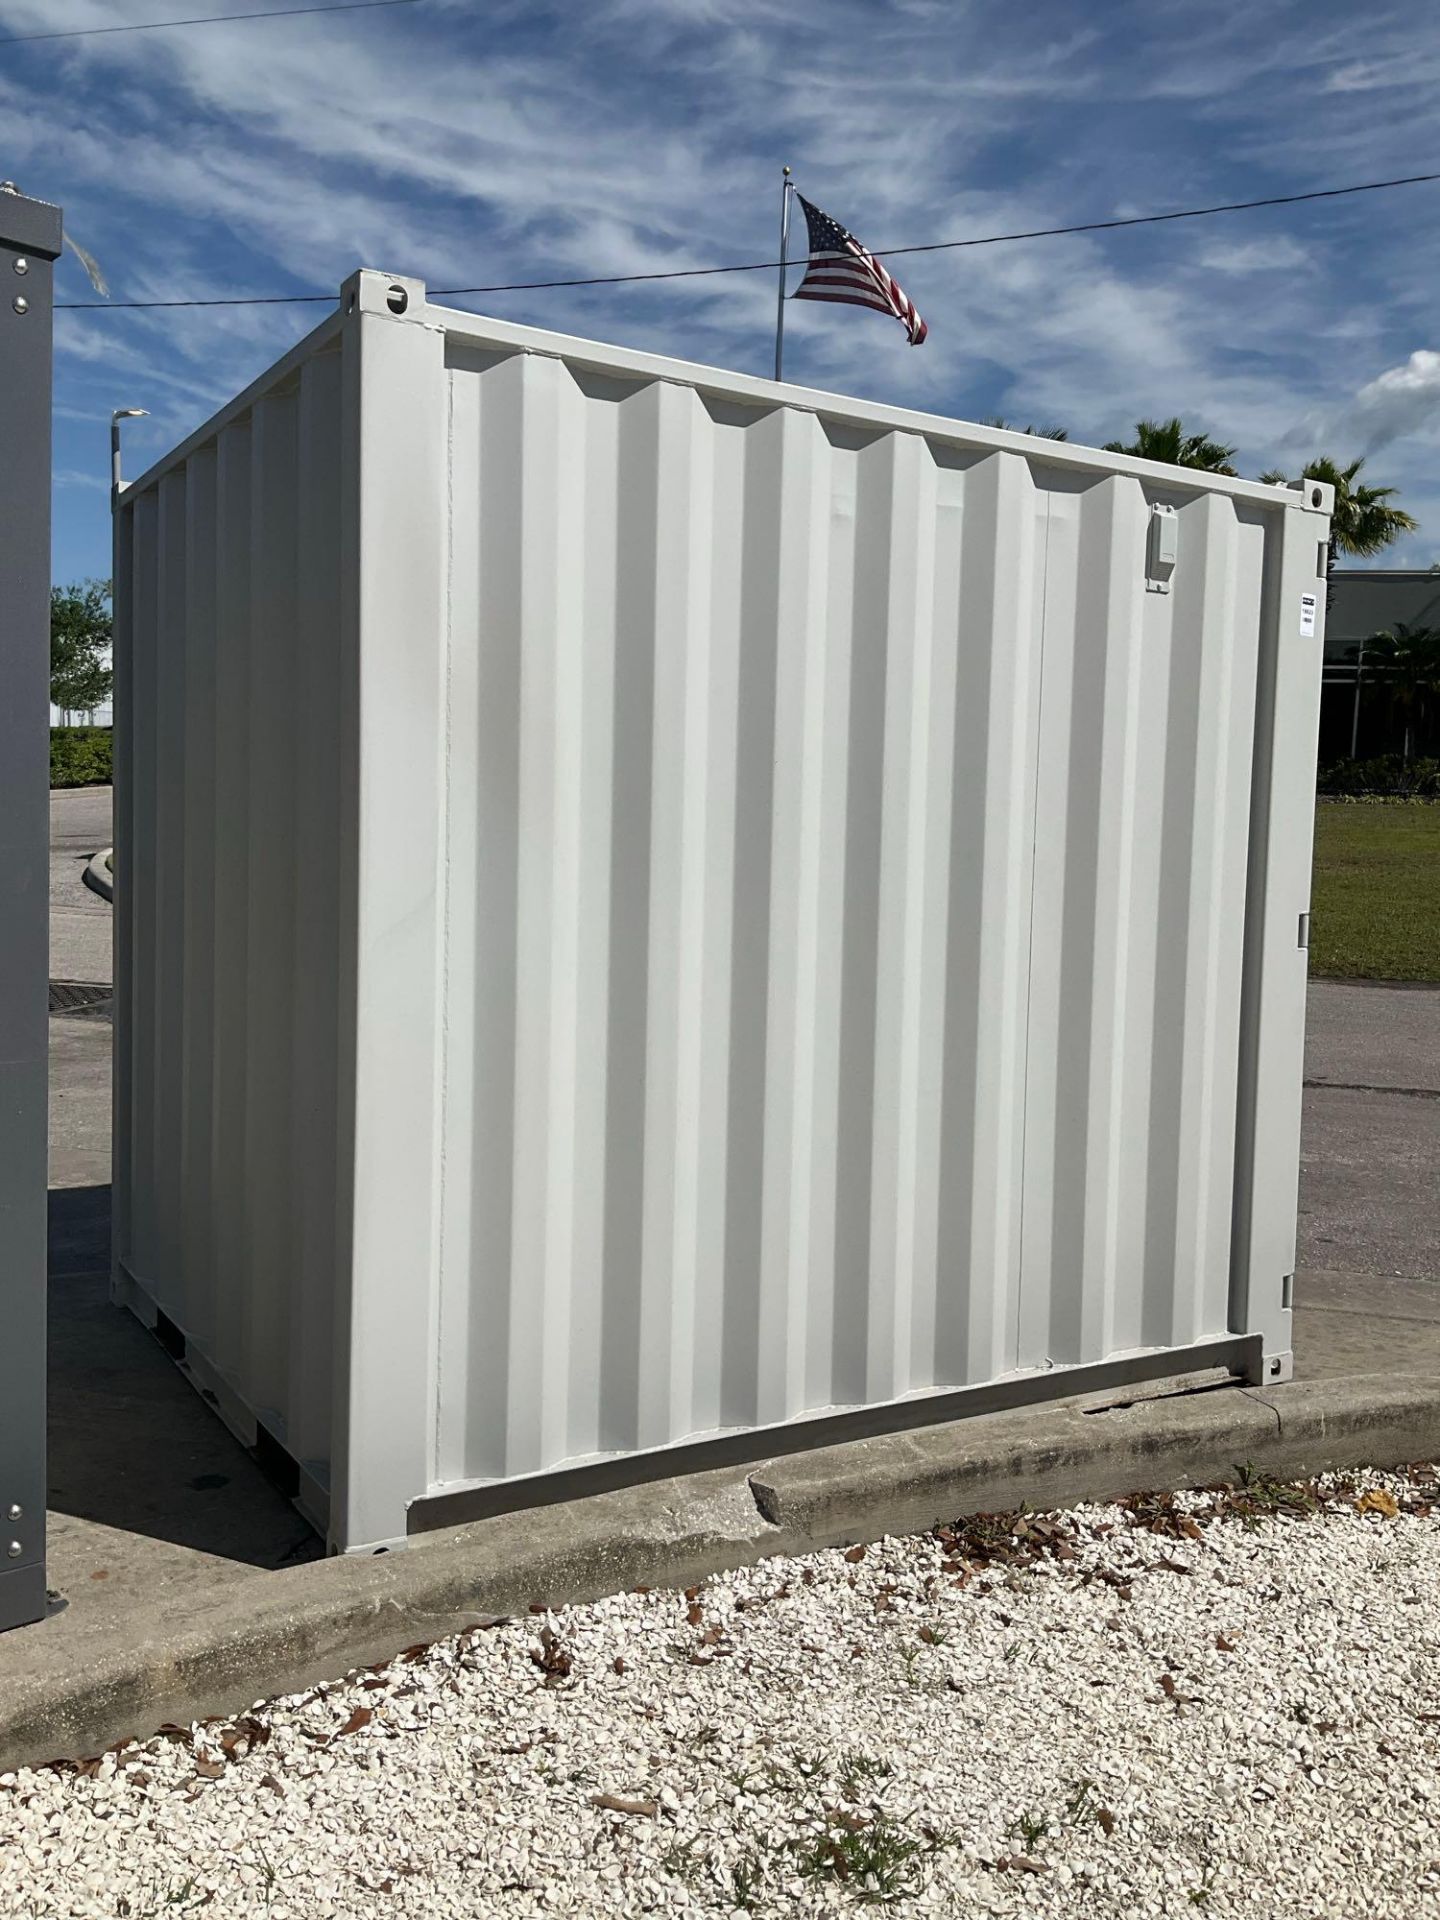 8' OFFICE / STORAGE CONTAINER, FORK POCKETS WITH SIDE DOOR ENTRANCE & SIDE WINDOW, APPROX 86'' TALL - Image 3 of 7